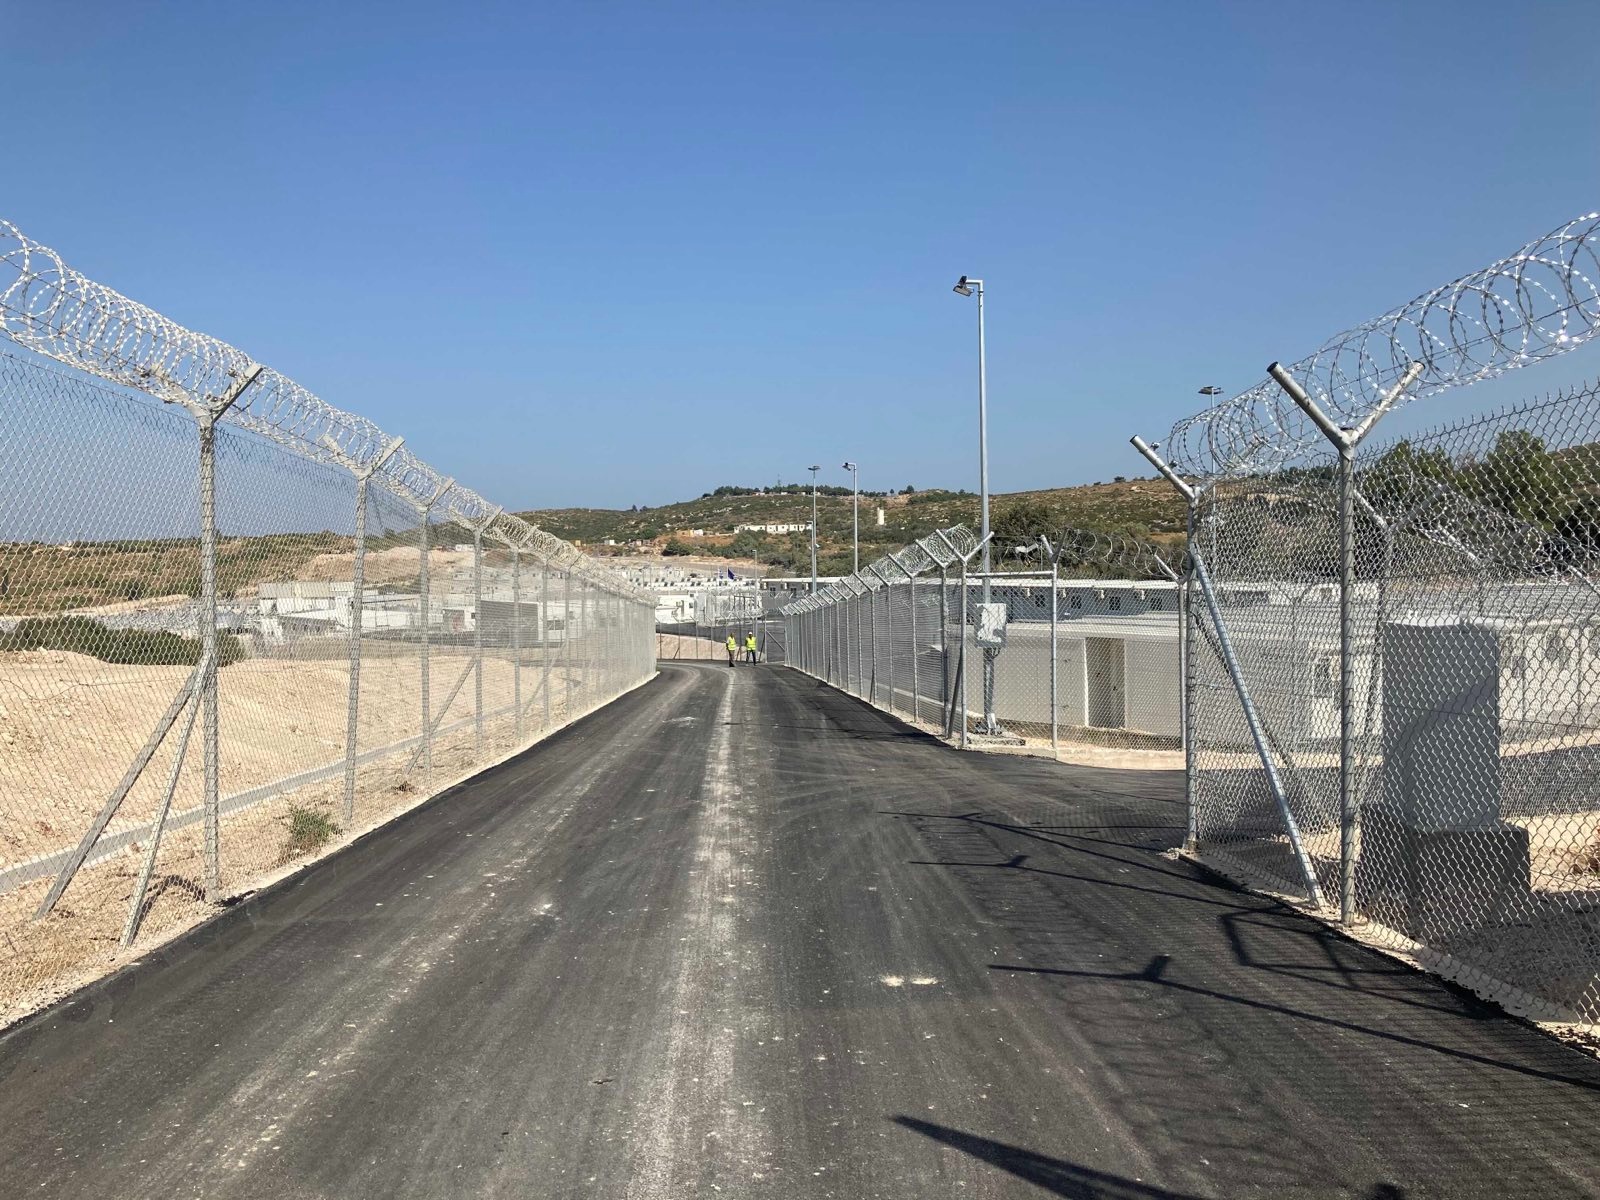 New camps in Greece: Panopticon for refugees